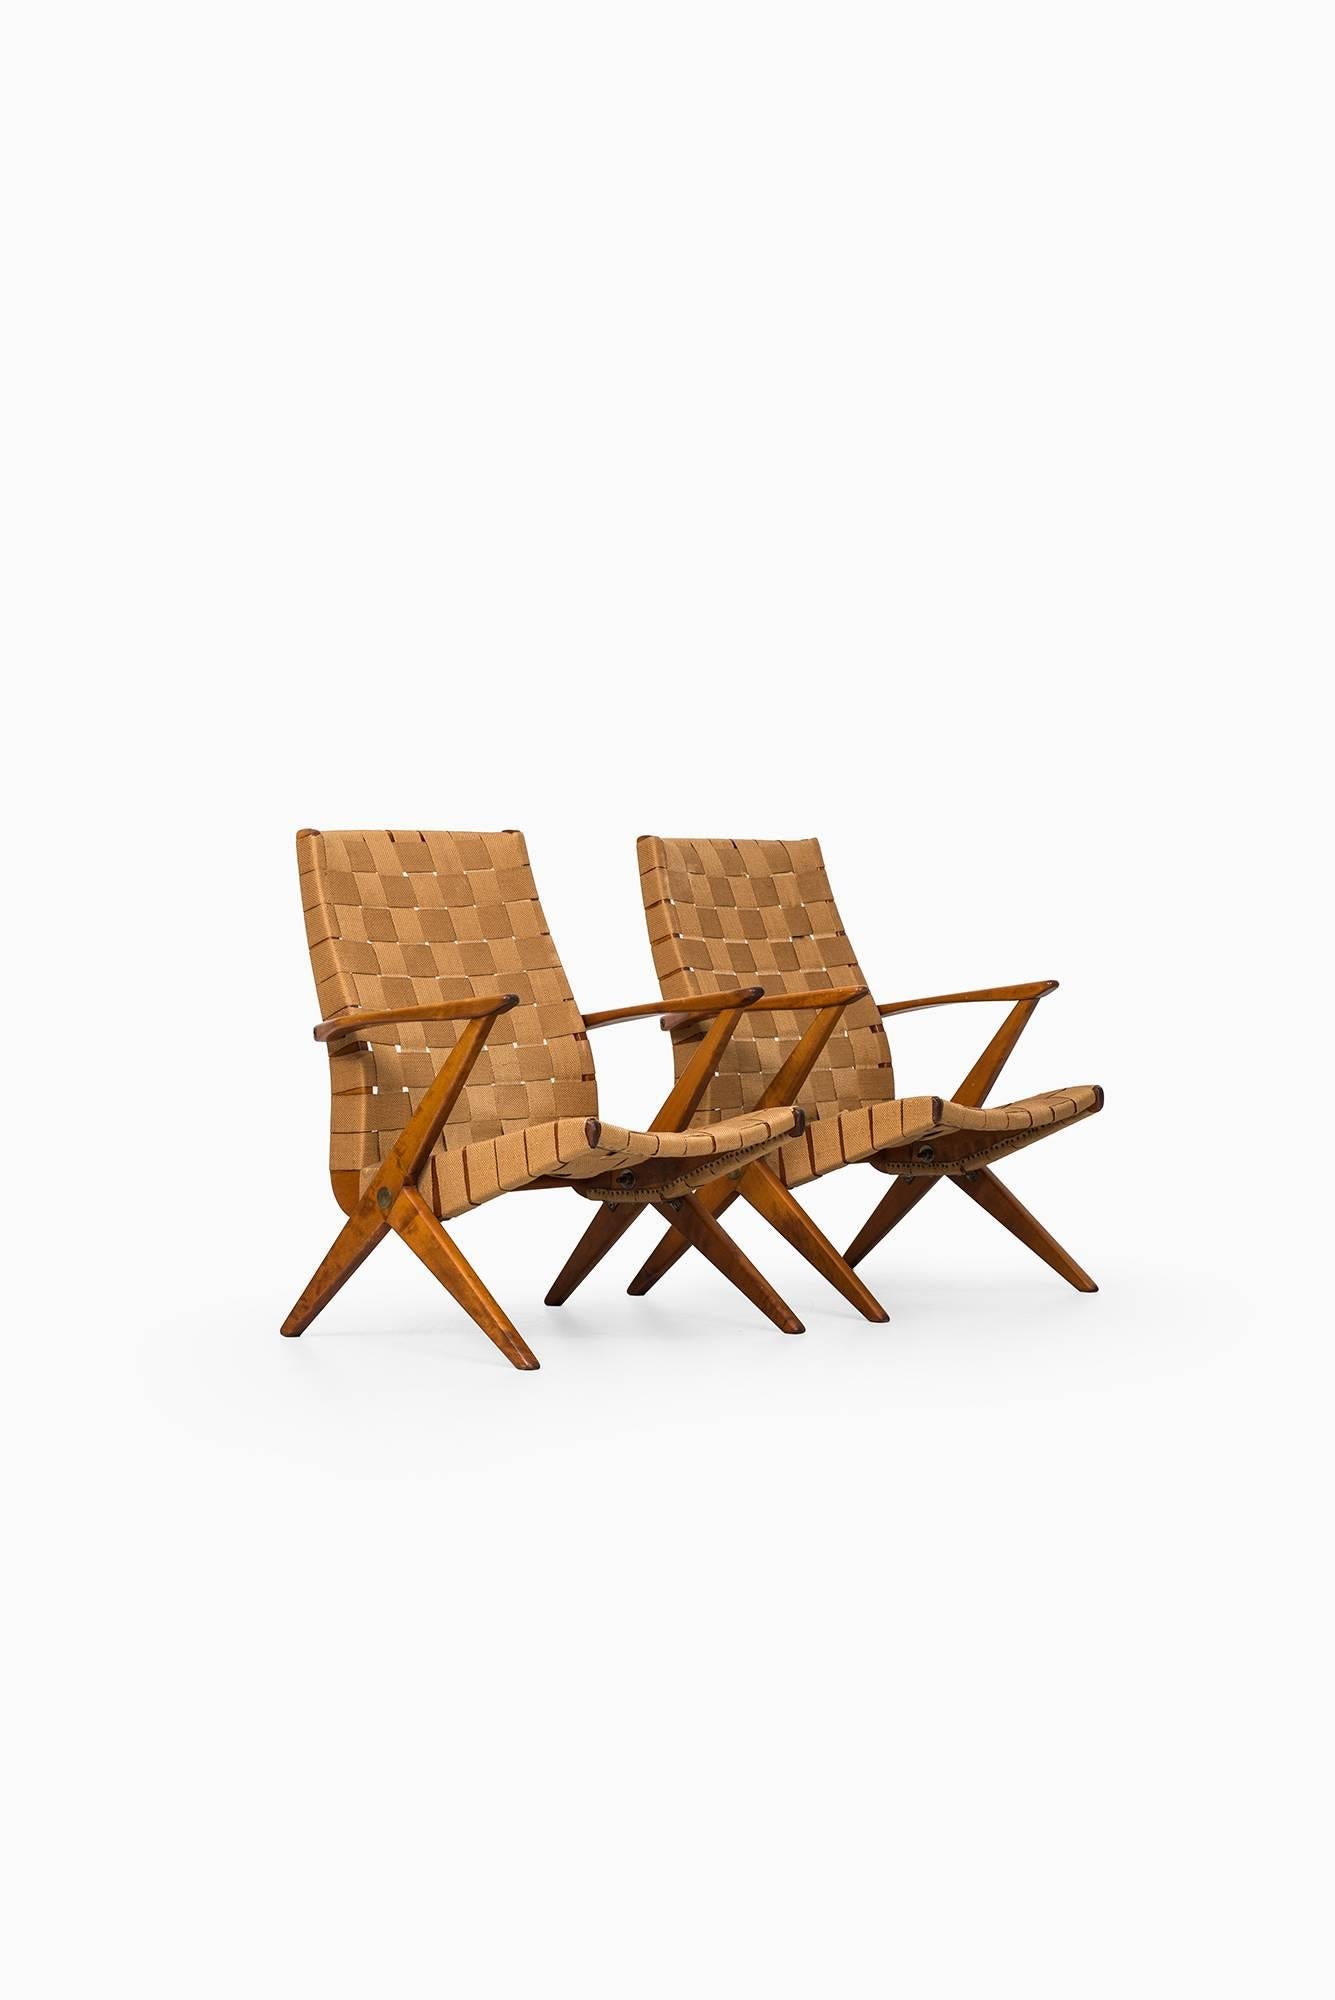 Rare pair of easy chairs designed by Bengt Ruda. Produced by Nordiska Kompaniet in Sweden.